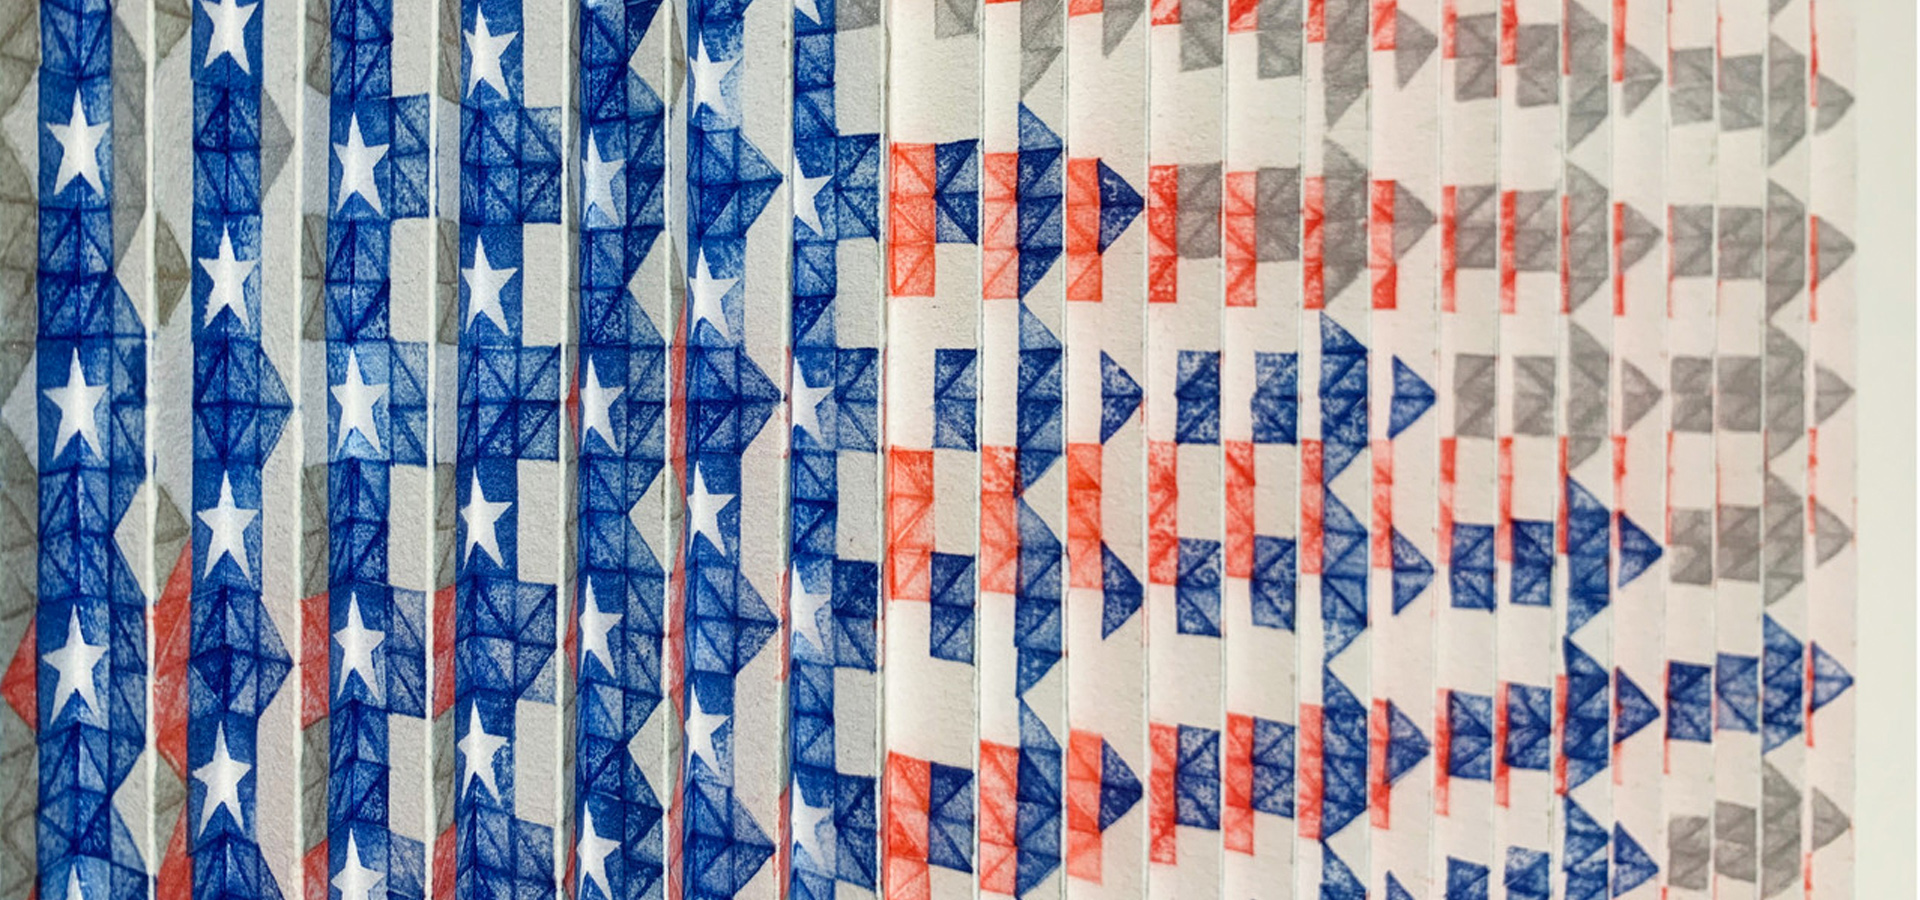 A series of folded and stamped papers that collectively make up the American flag.